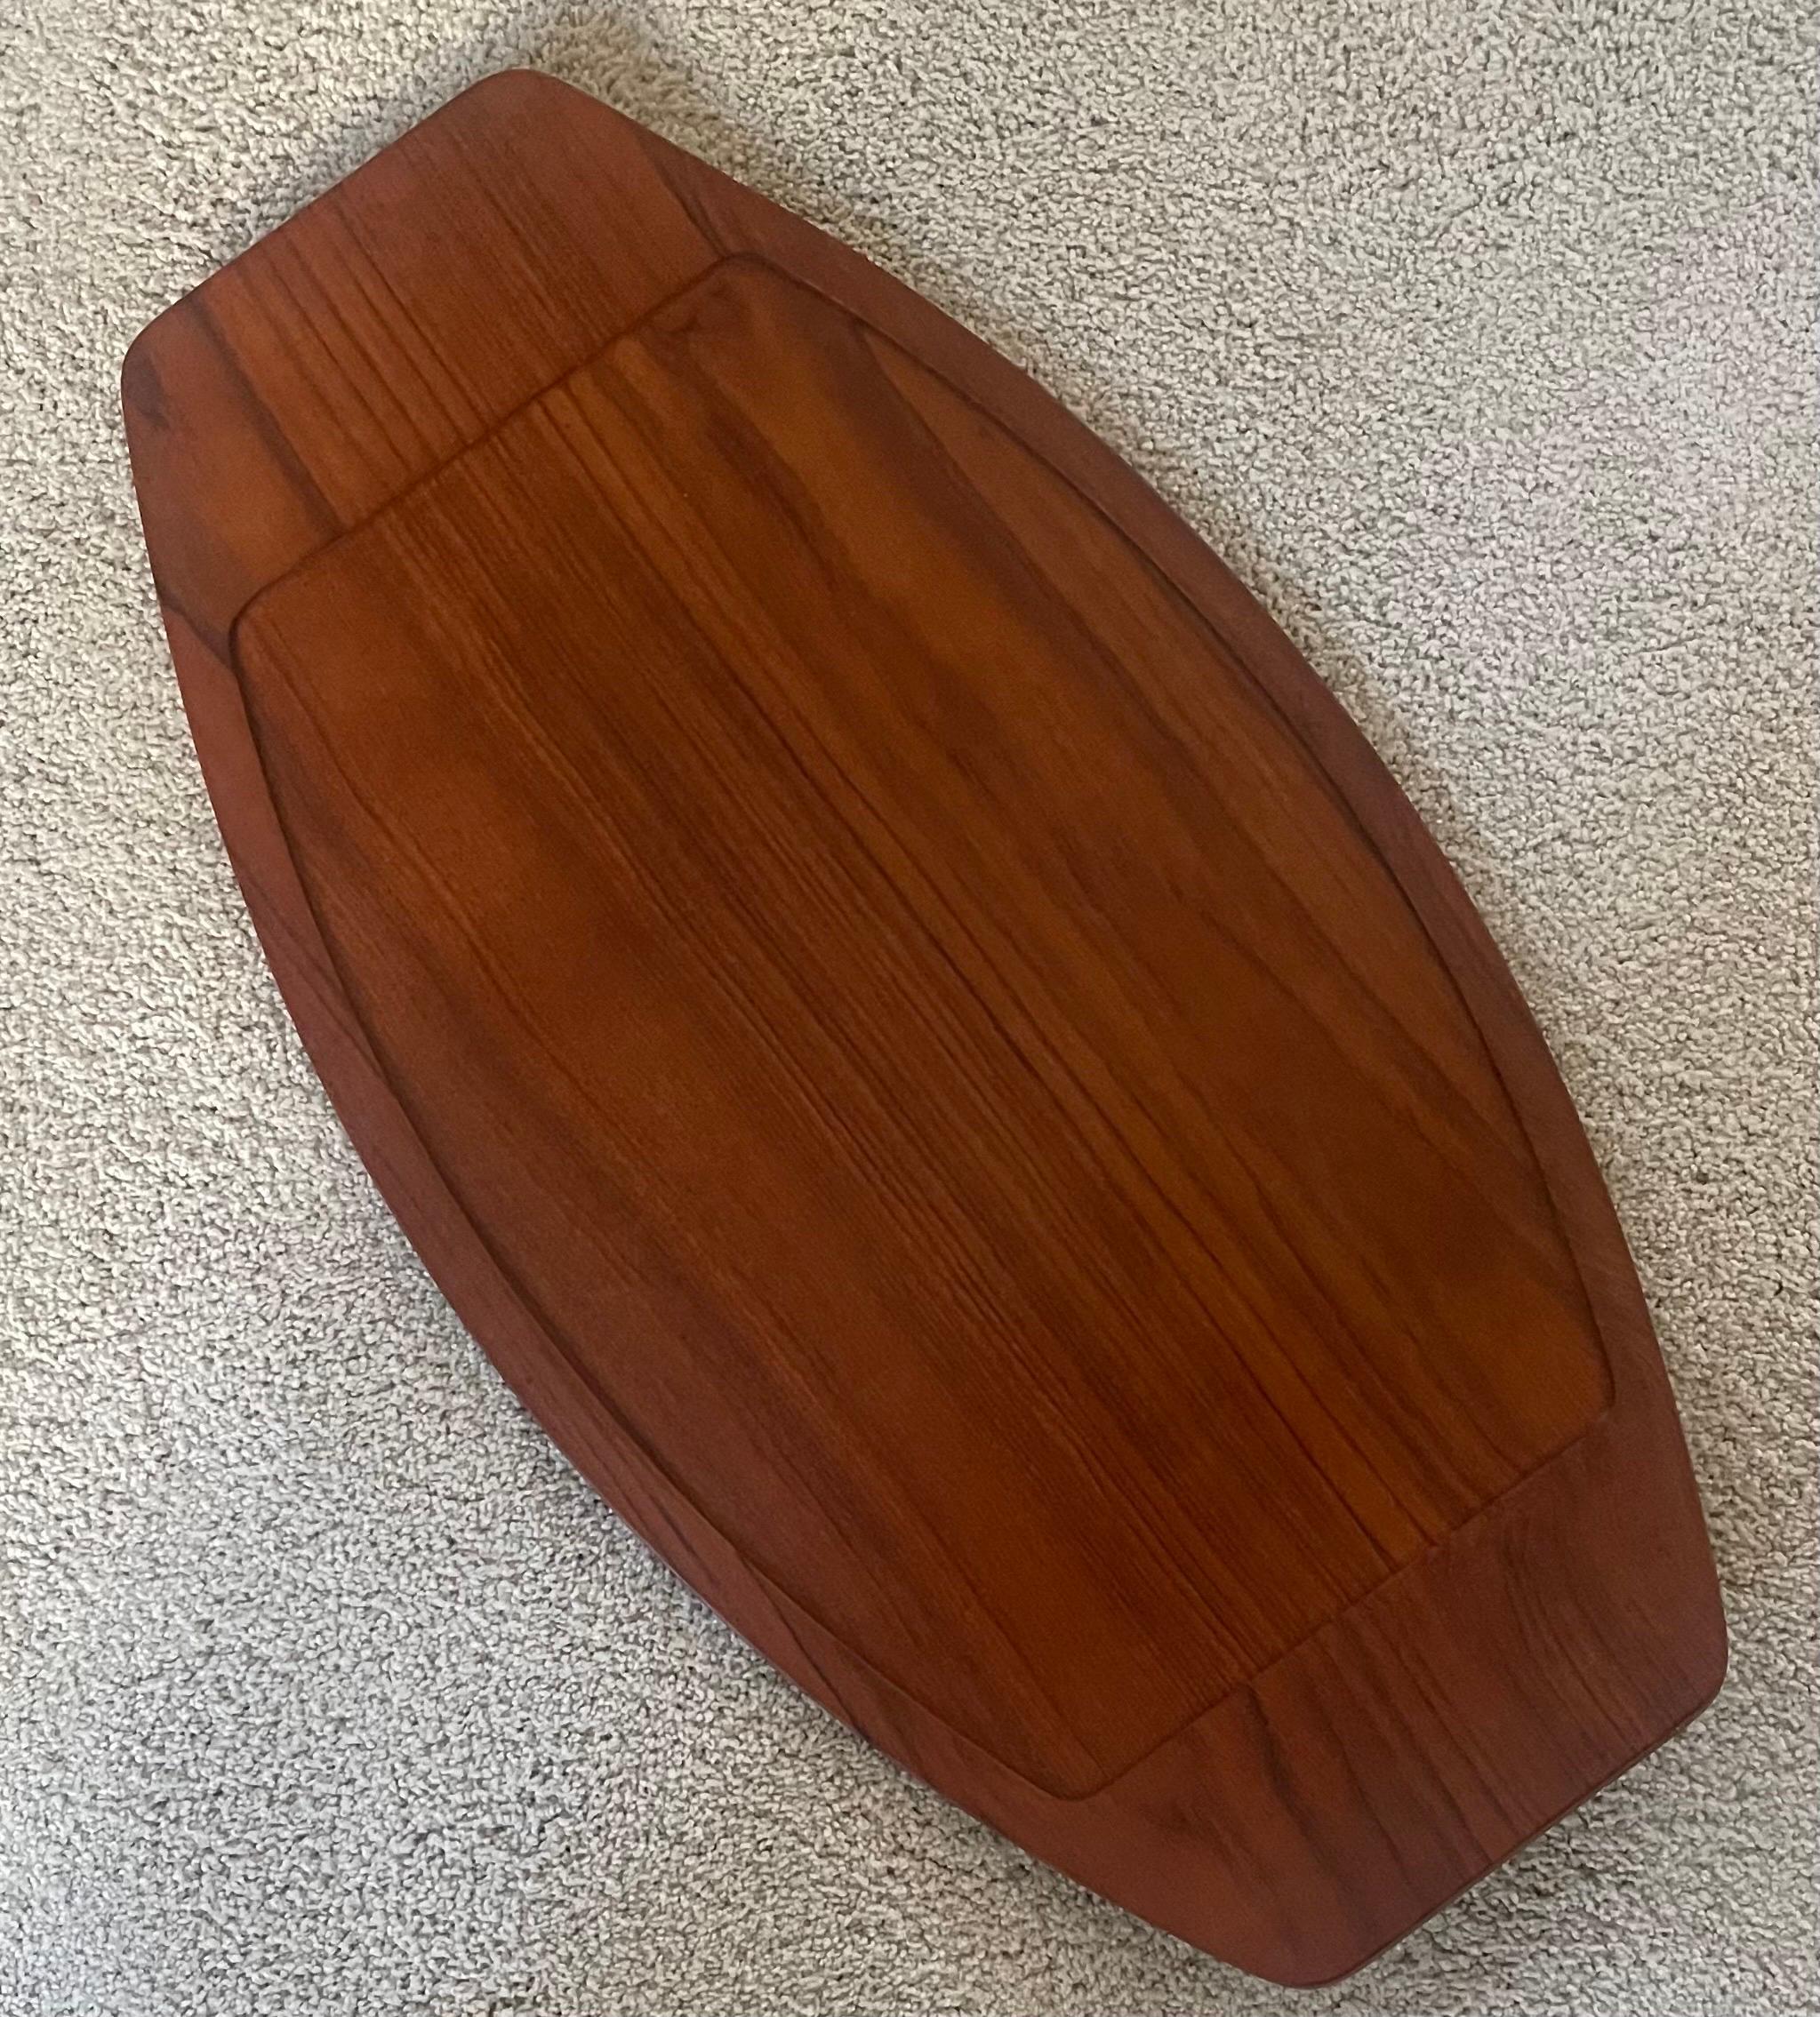 Scandinavian Modern Large Solid Teak Surfboard Tray with Raised Edge by Digsmed - Rare For Sale